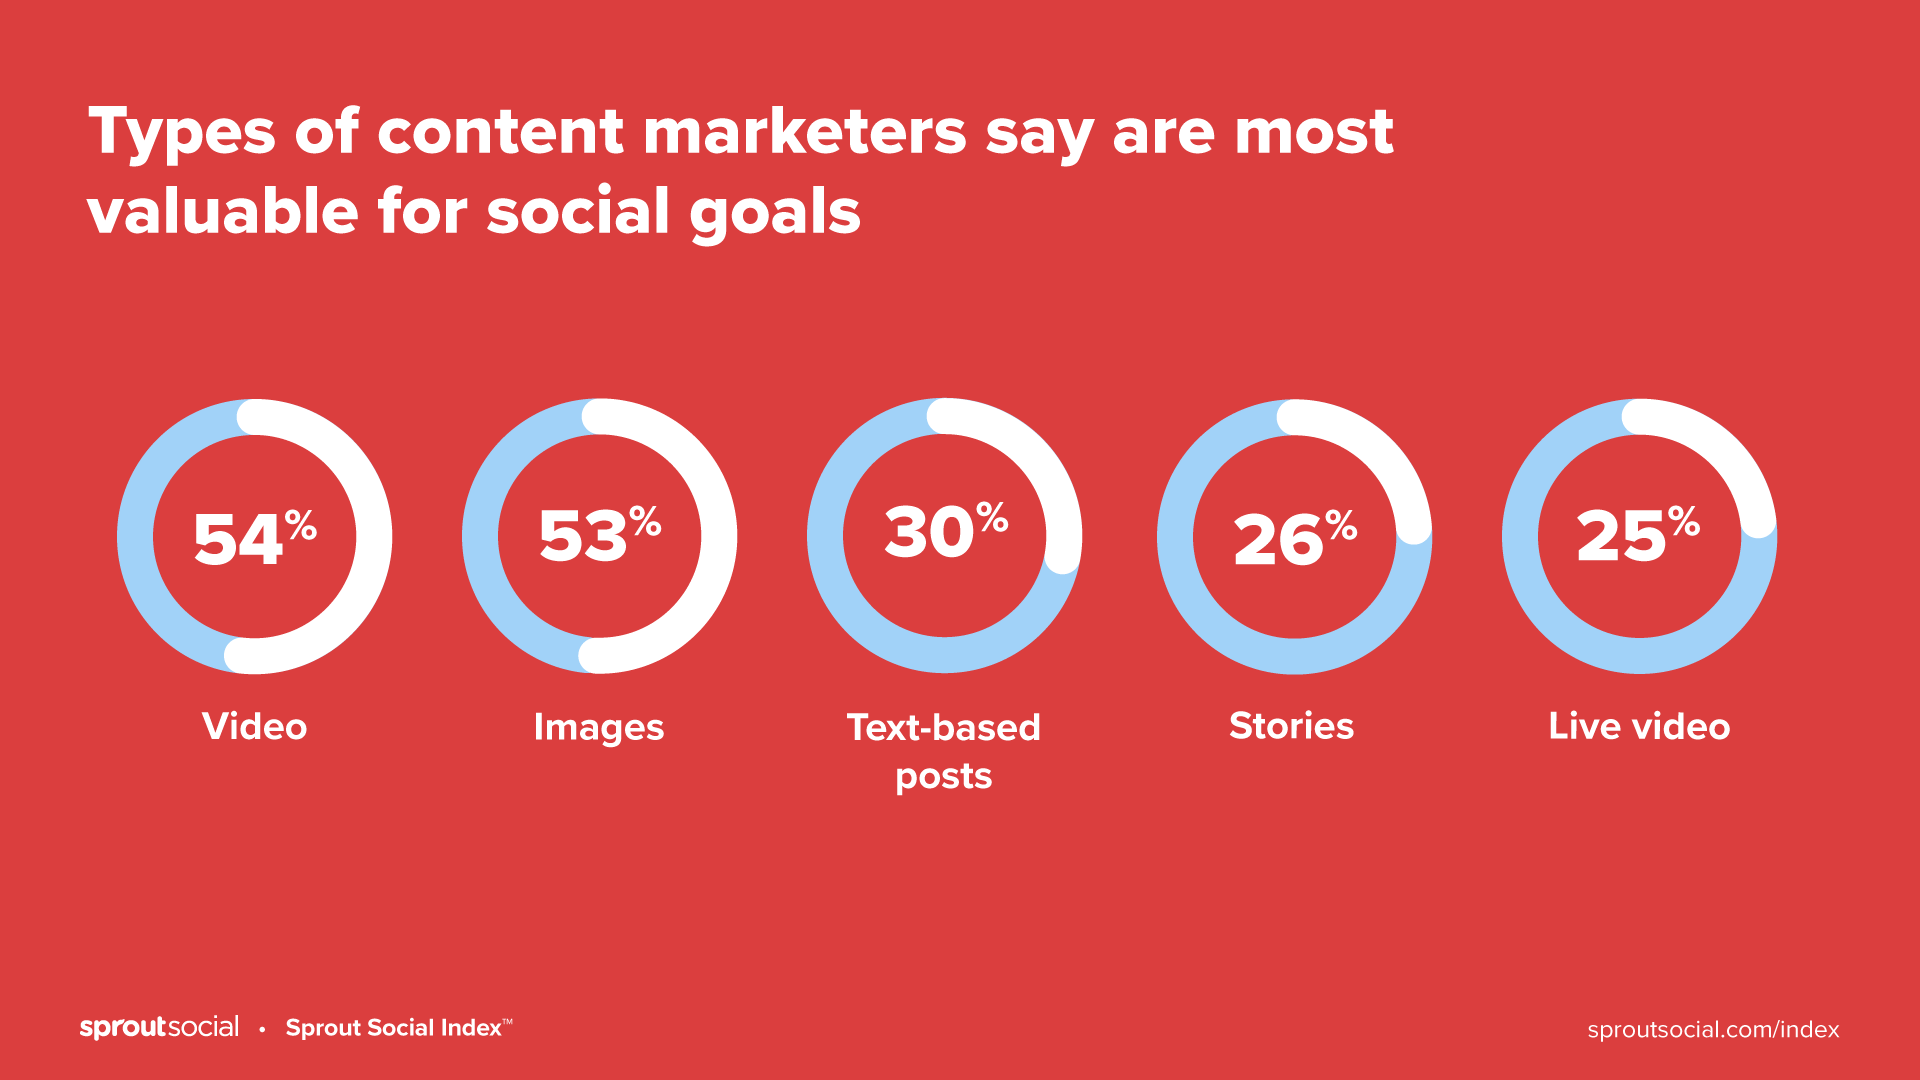 The top five types of content content marketers say are most valuable for social goals: video, images, text based posts, stories and live video. 